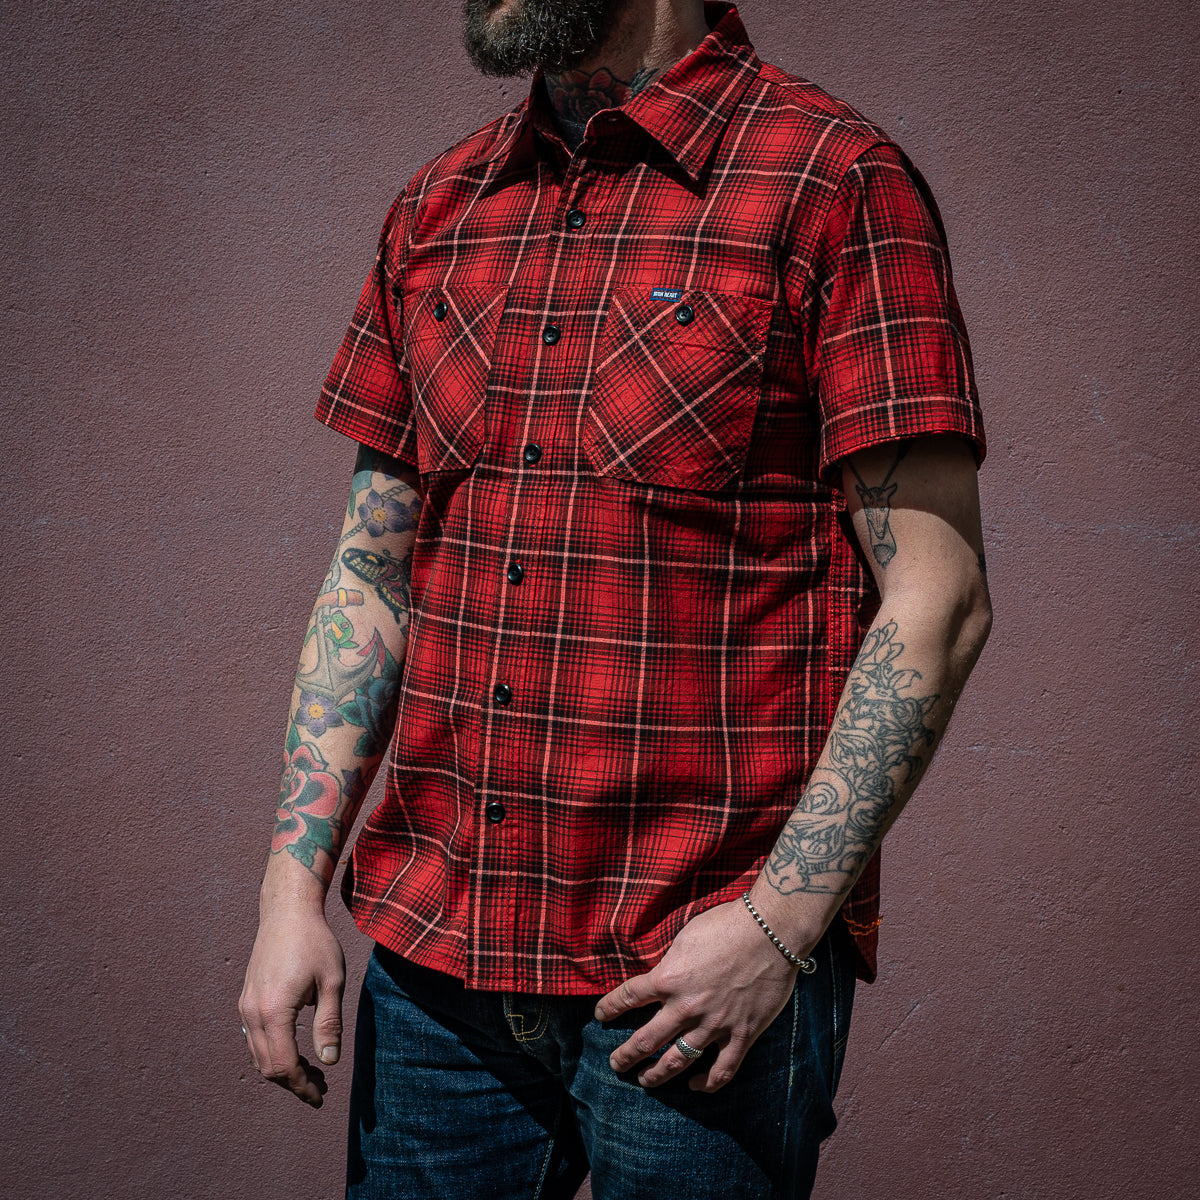 IHSH-392-RED - 5oz Selvedge Short Sleeved Work Shirt - Red Vintage Check